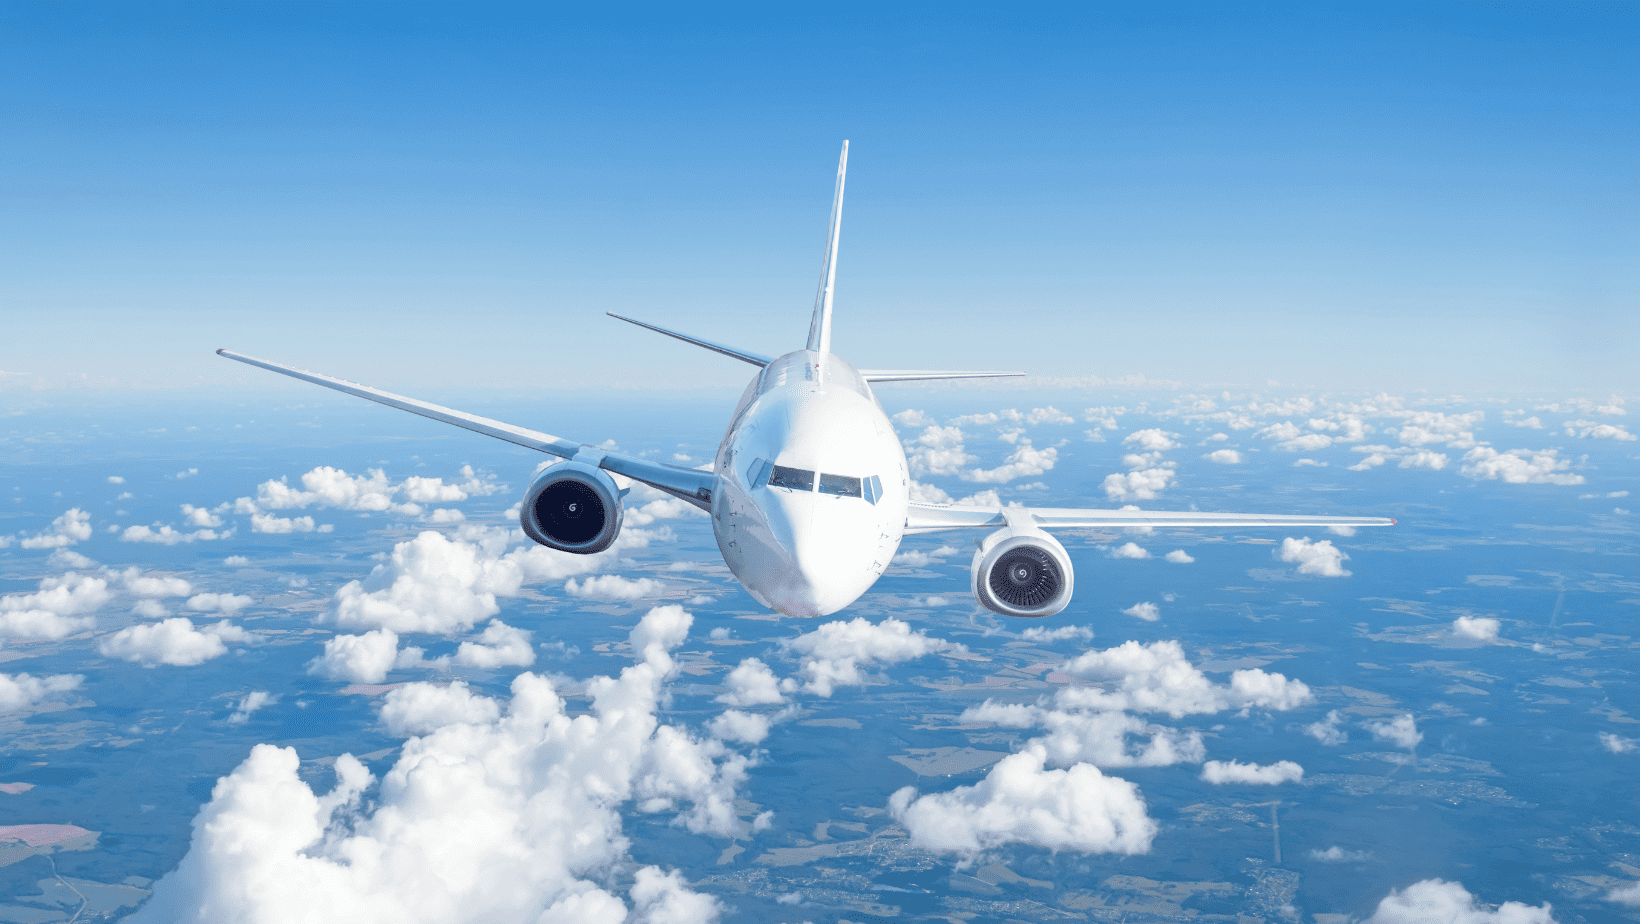 The future of aviation: going beyond challenges to net zero